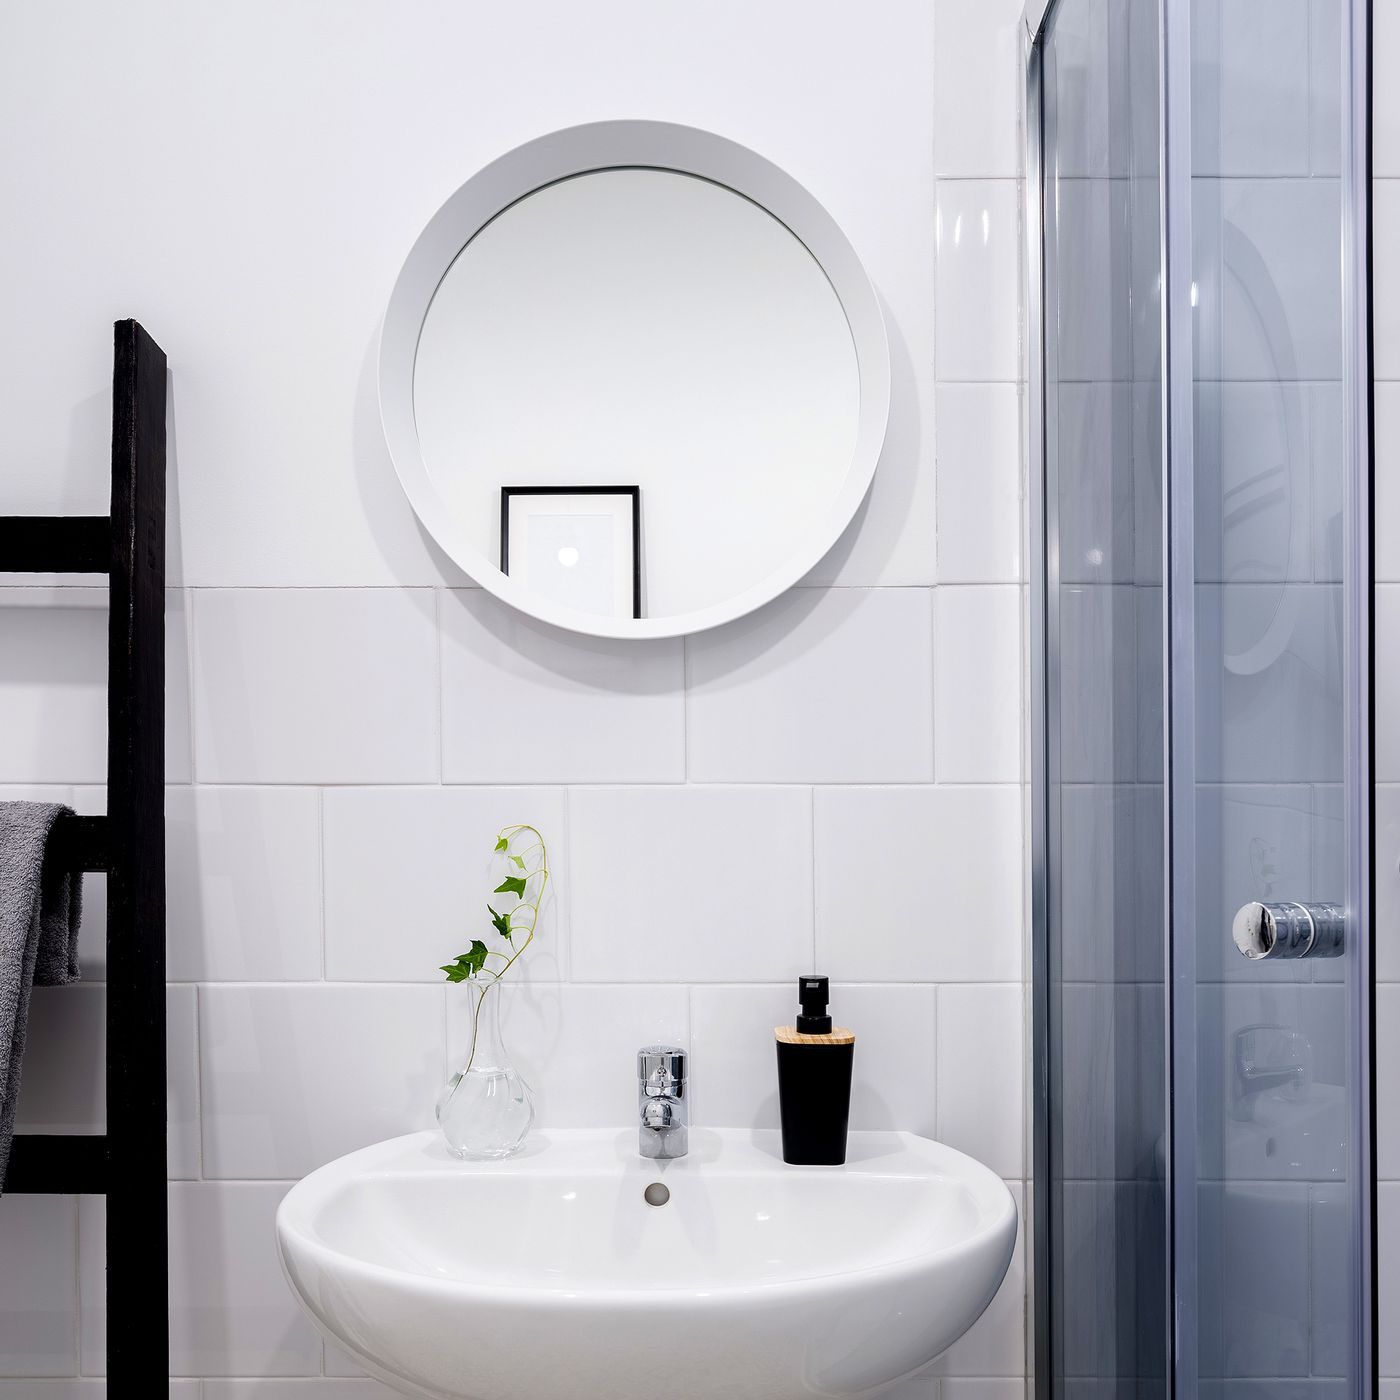 How To Plan Your Space For A Small Bathroom Remodel This Old House